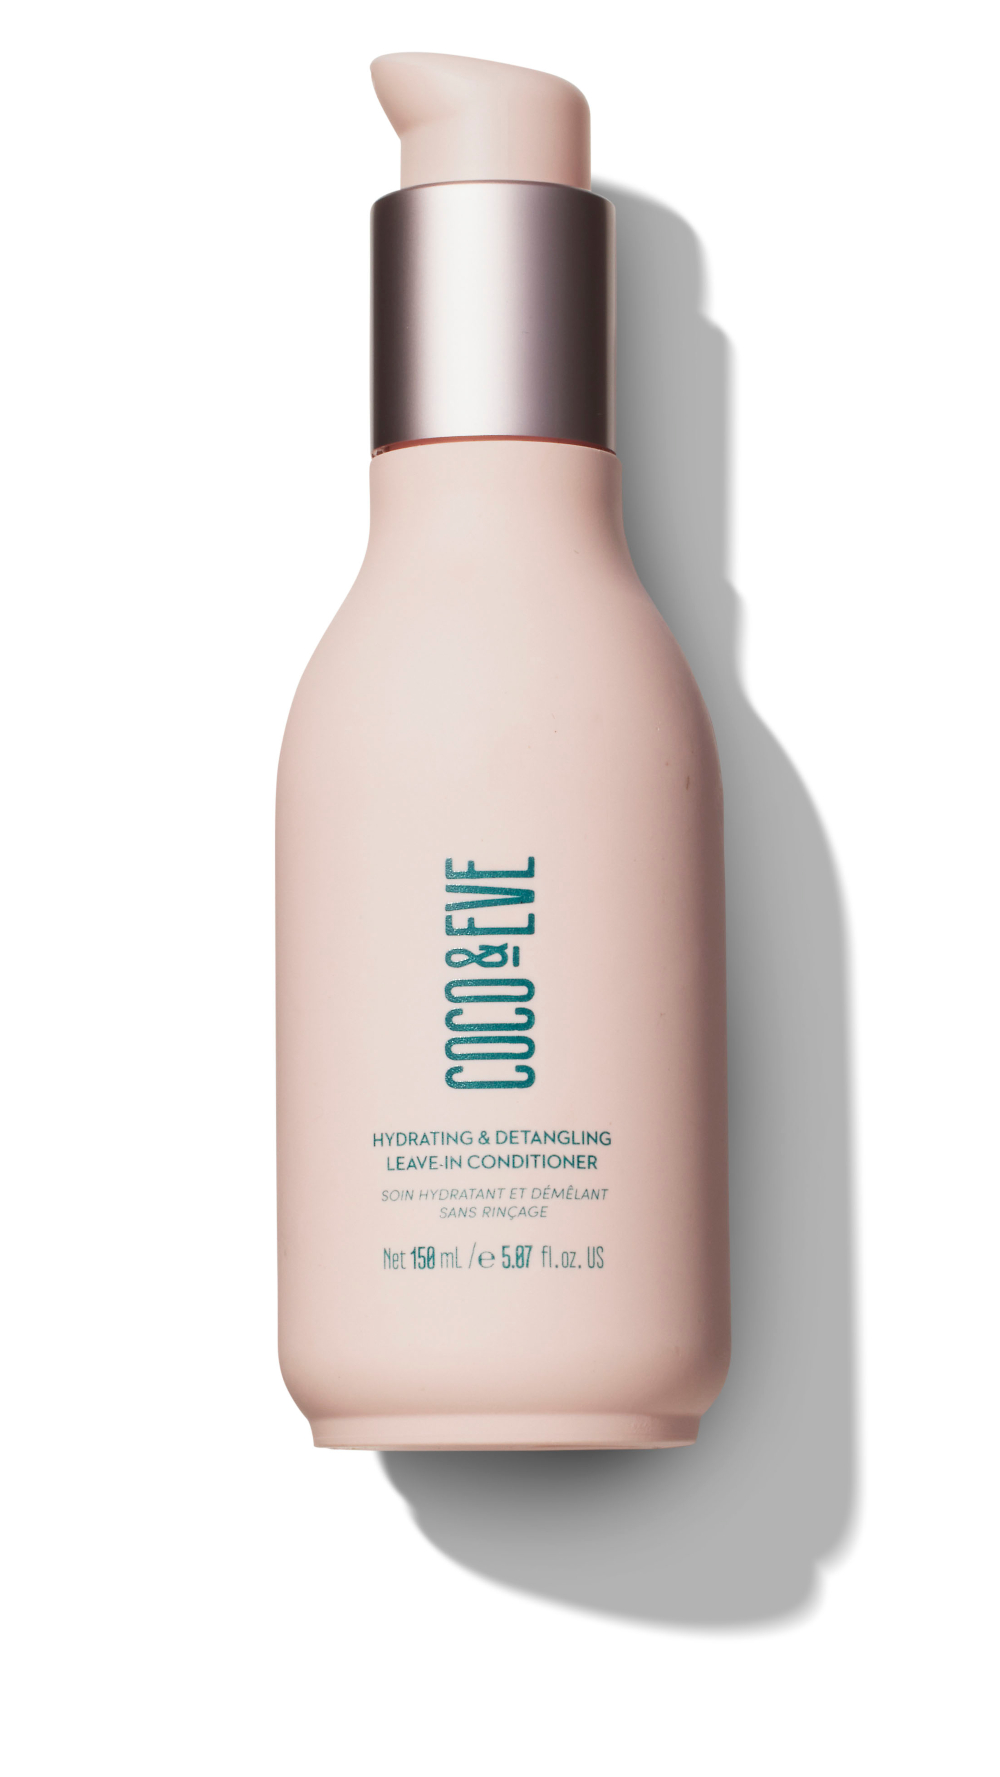 Coco & Eve Like a Virgin Hydrating & Detangling Leave-In Conditioner, $34.